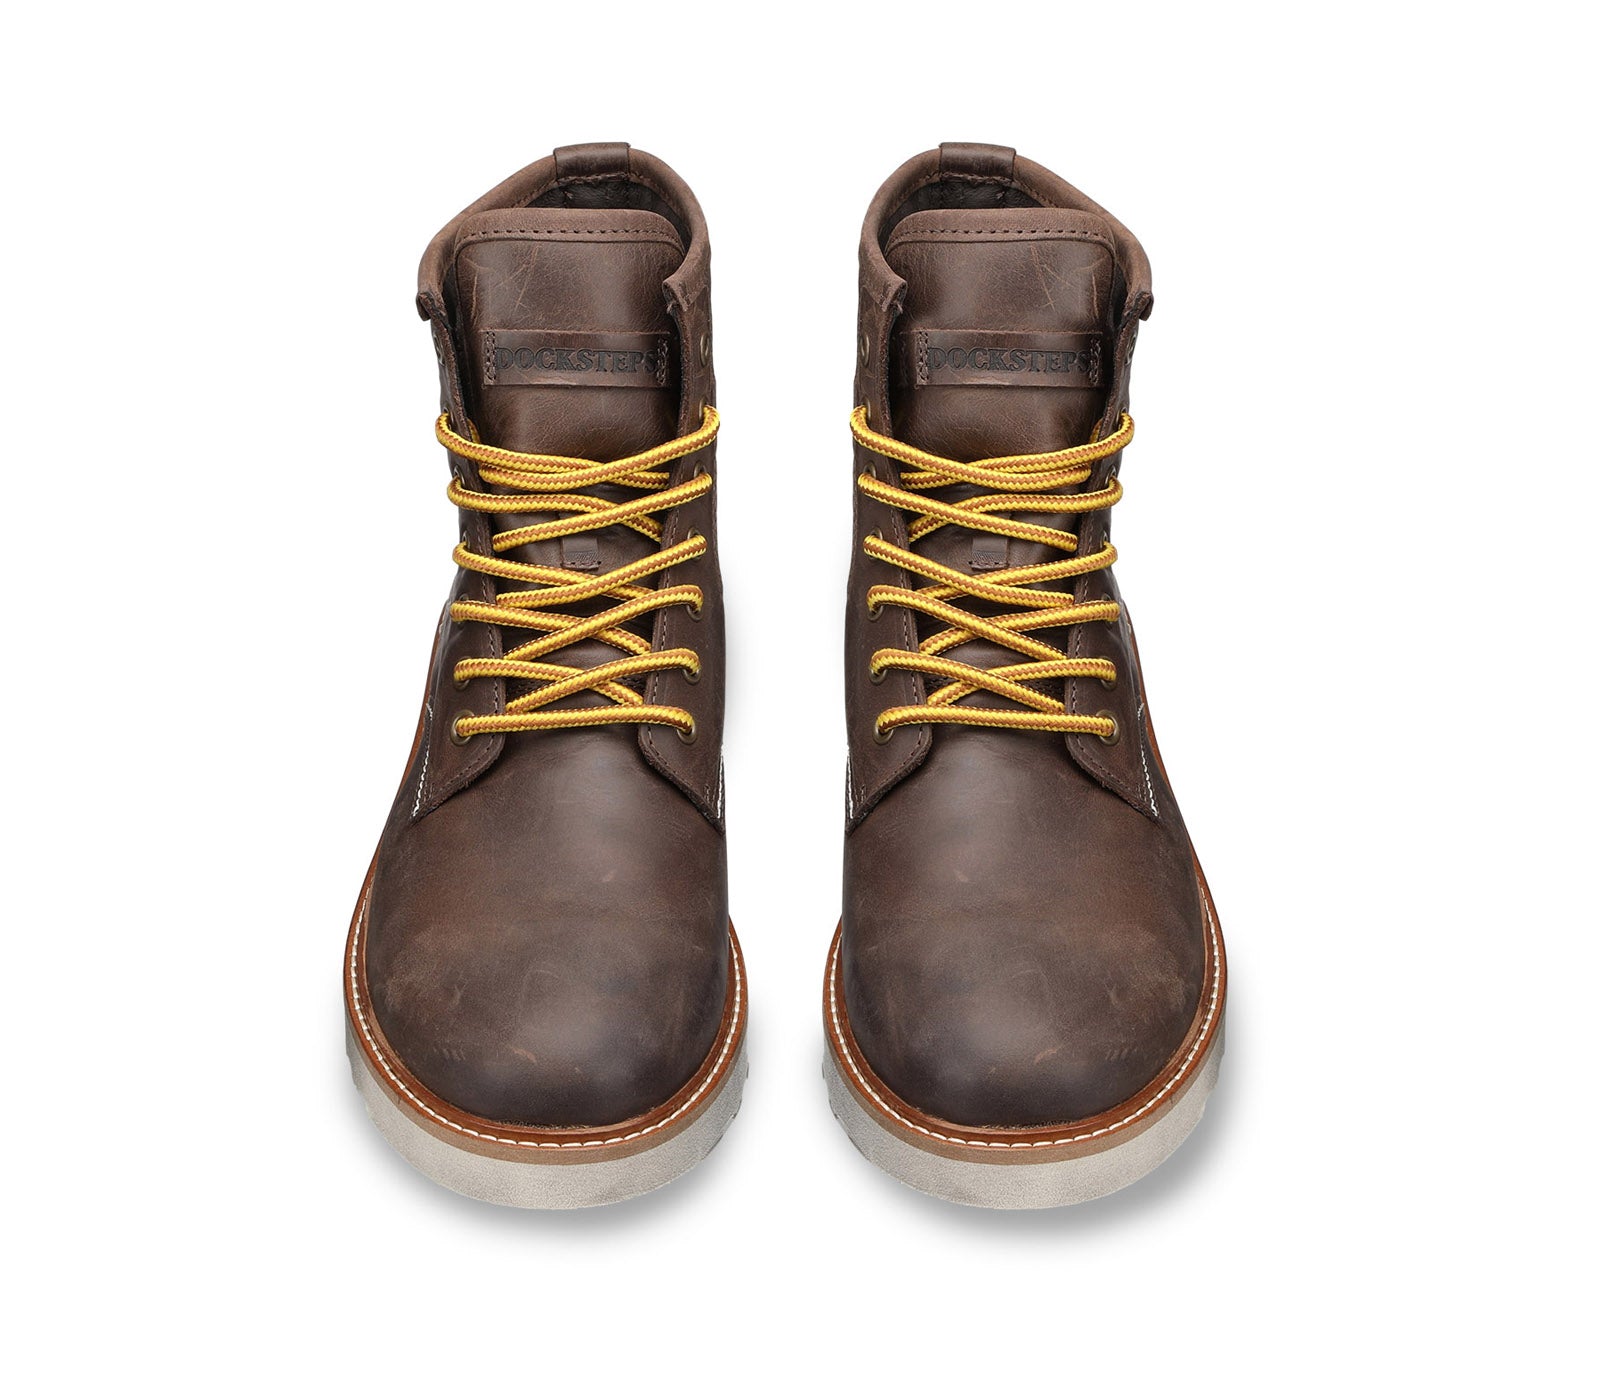 Dark Brown Men's Boot with Yellow Strings and Rubber Sole